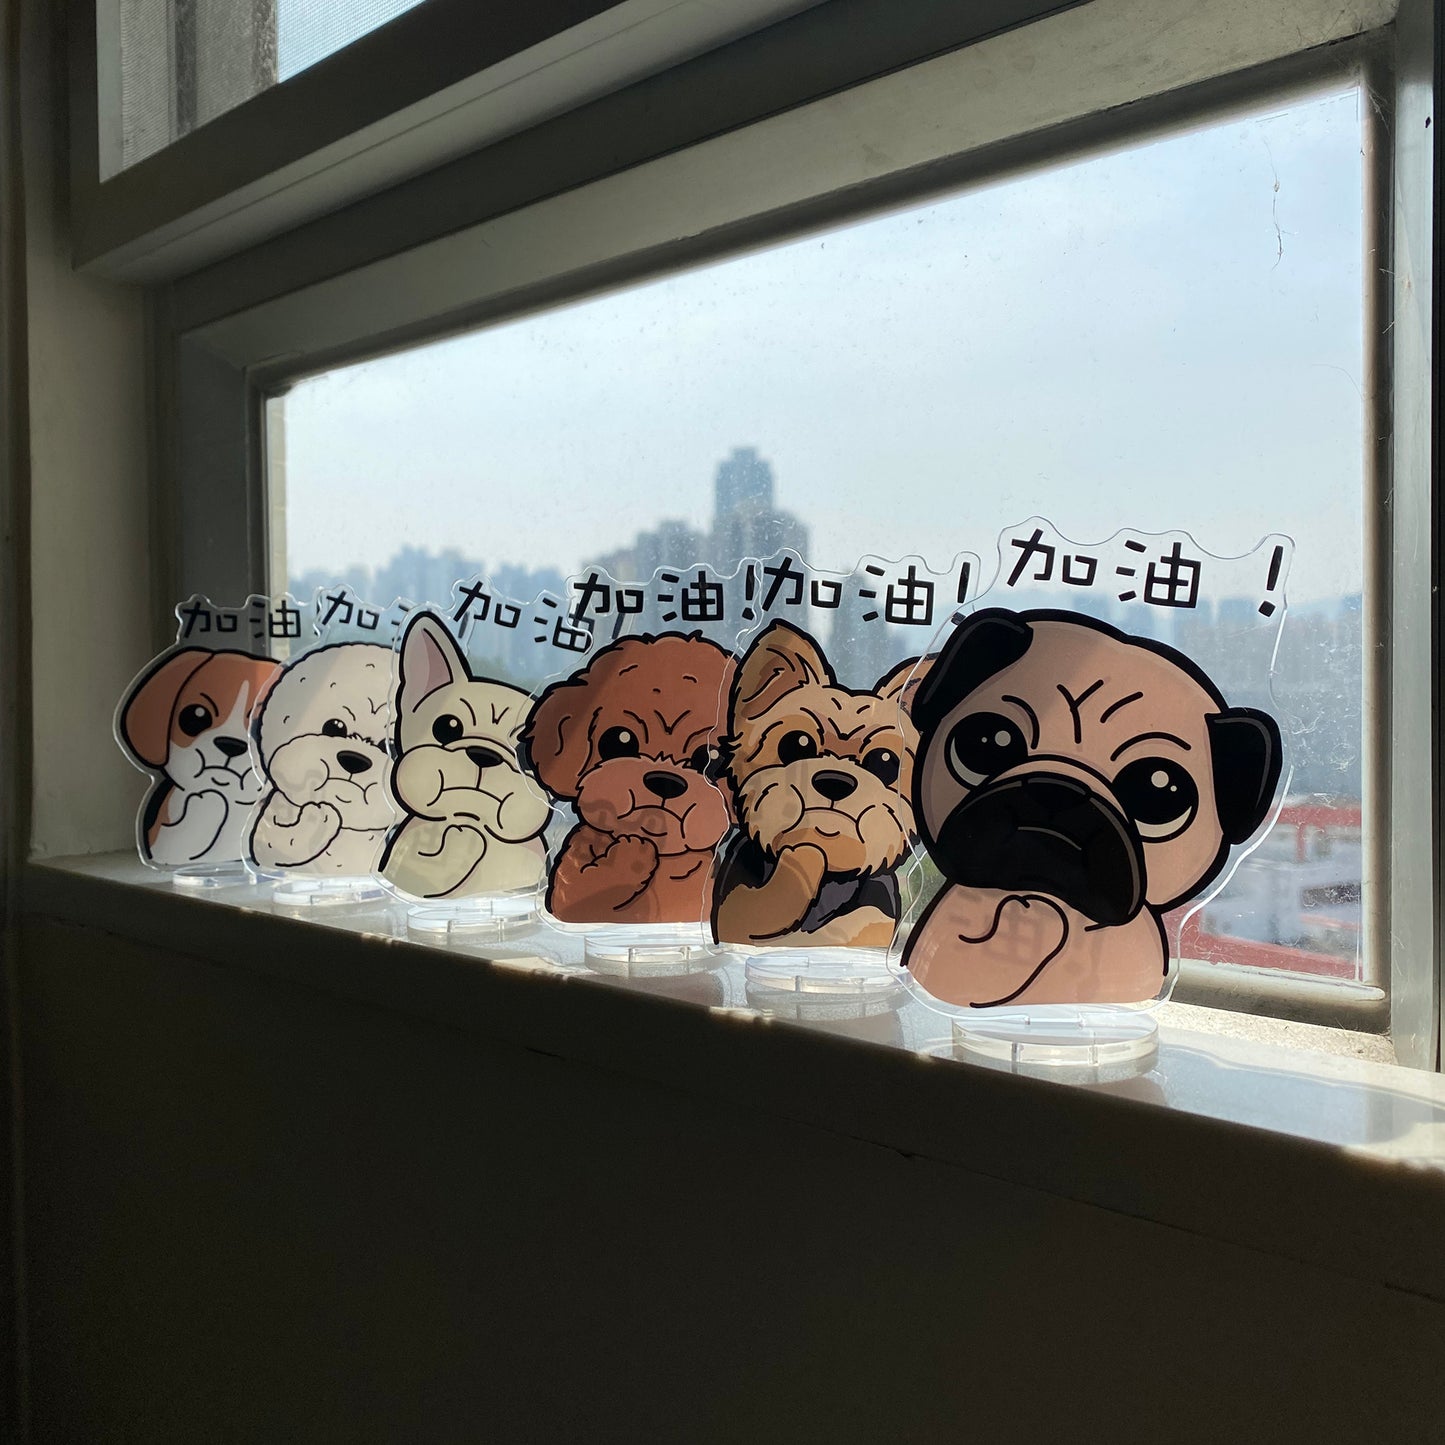 You can do it. Mike the puggy double-sided message stand